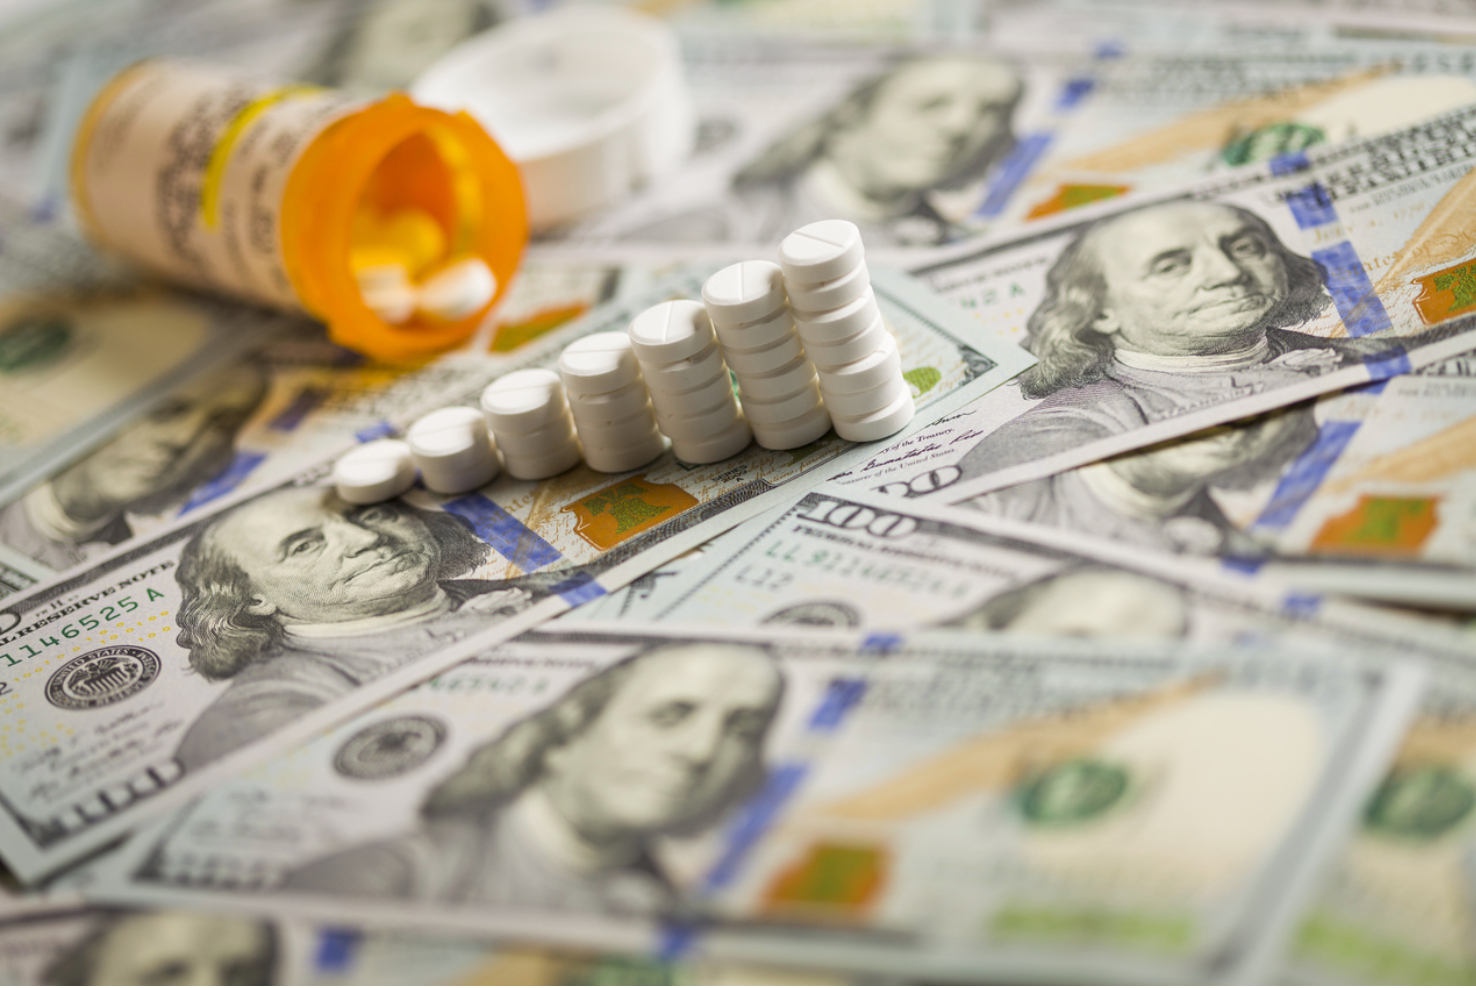 Partnerships Between Medicaid Programs and PBMs Will Shape Future of Health Care